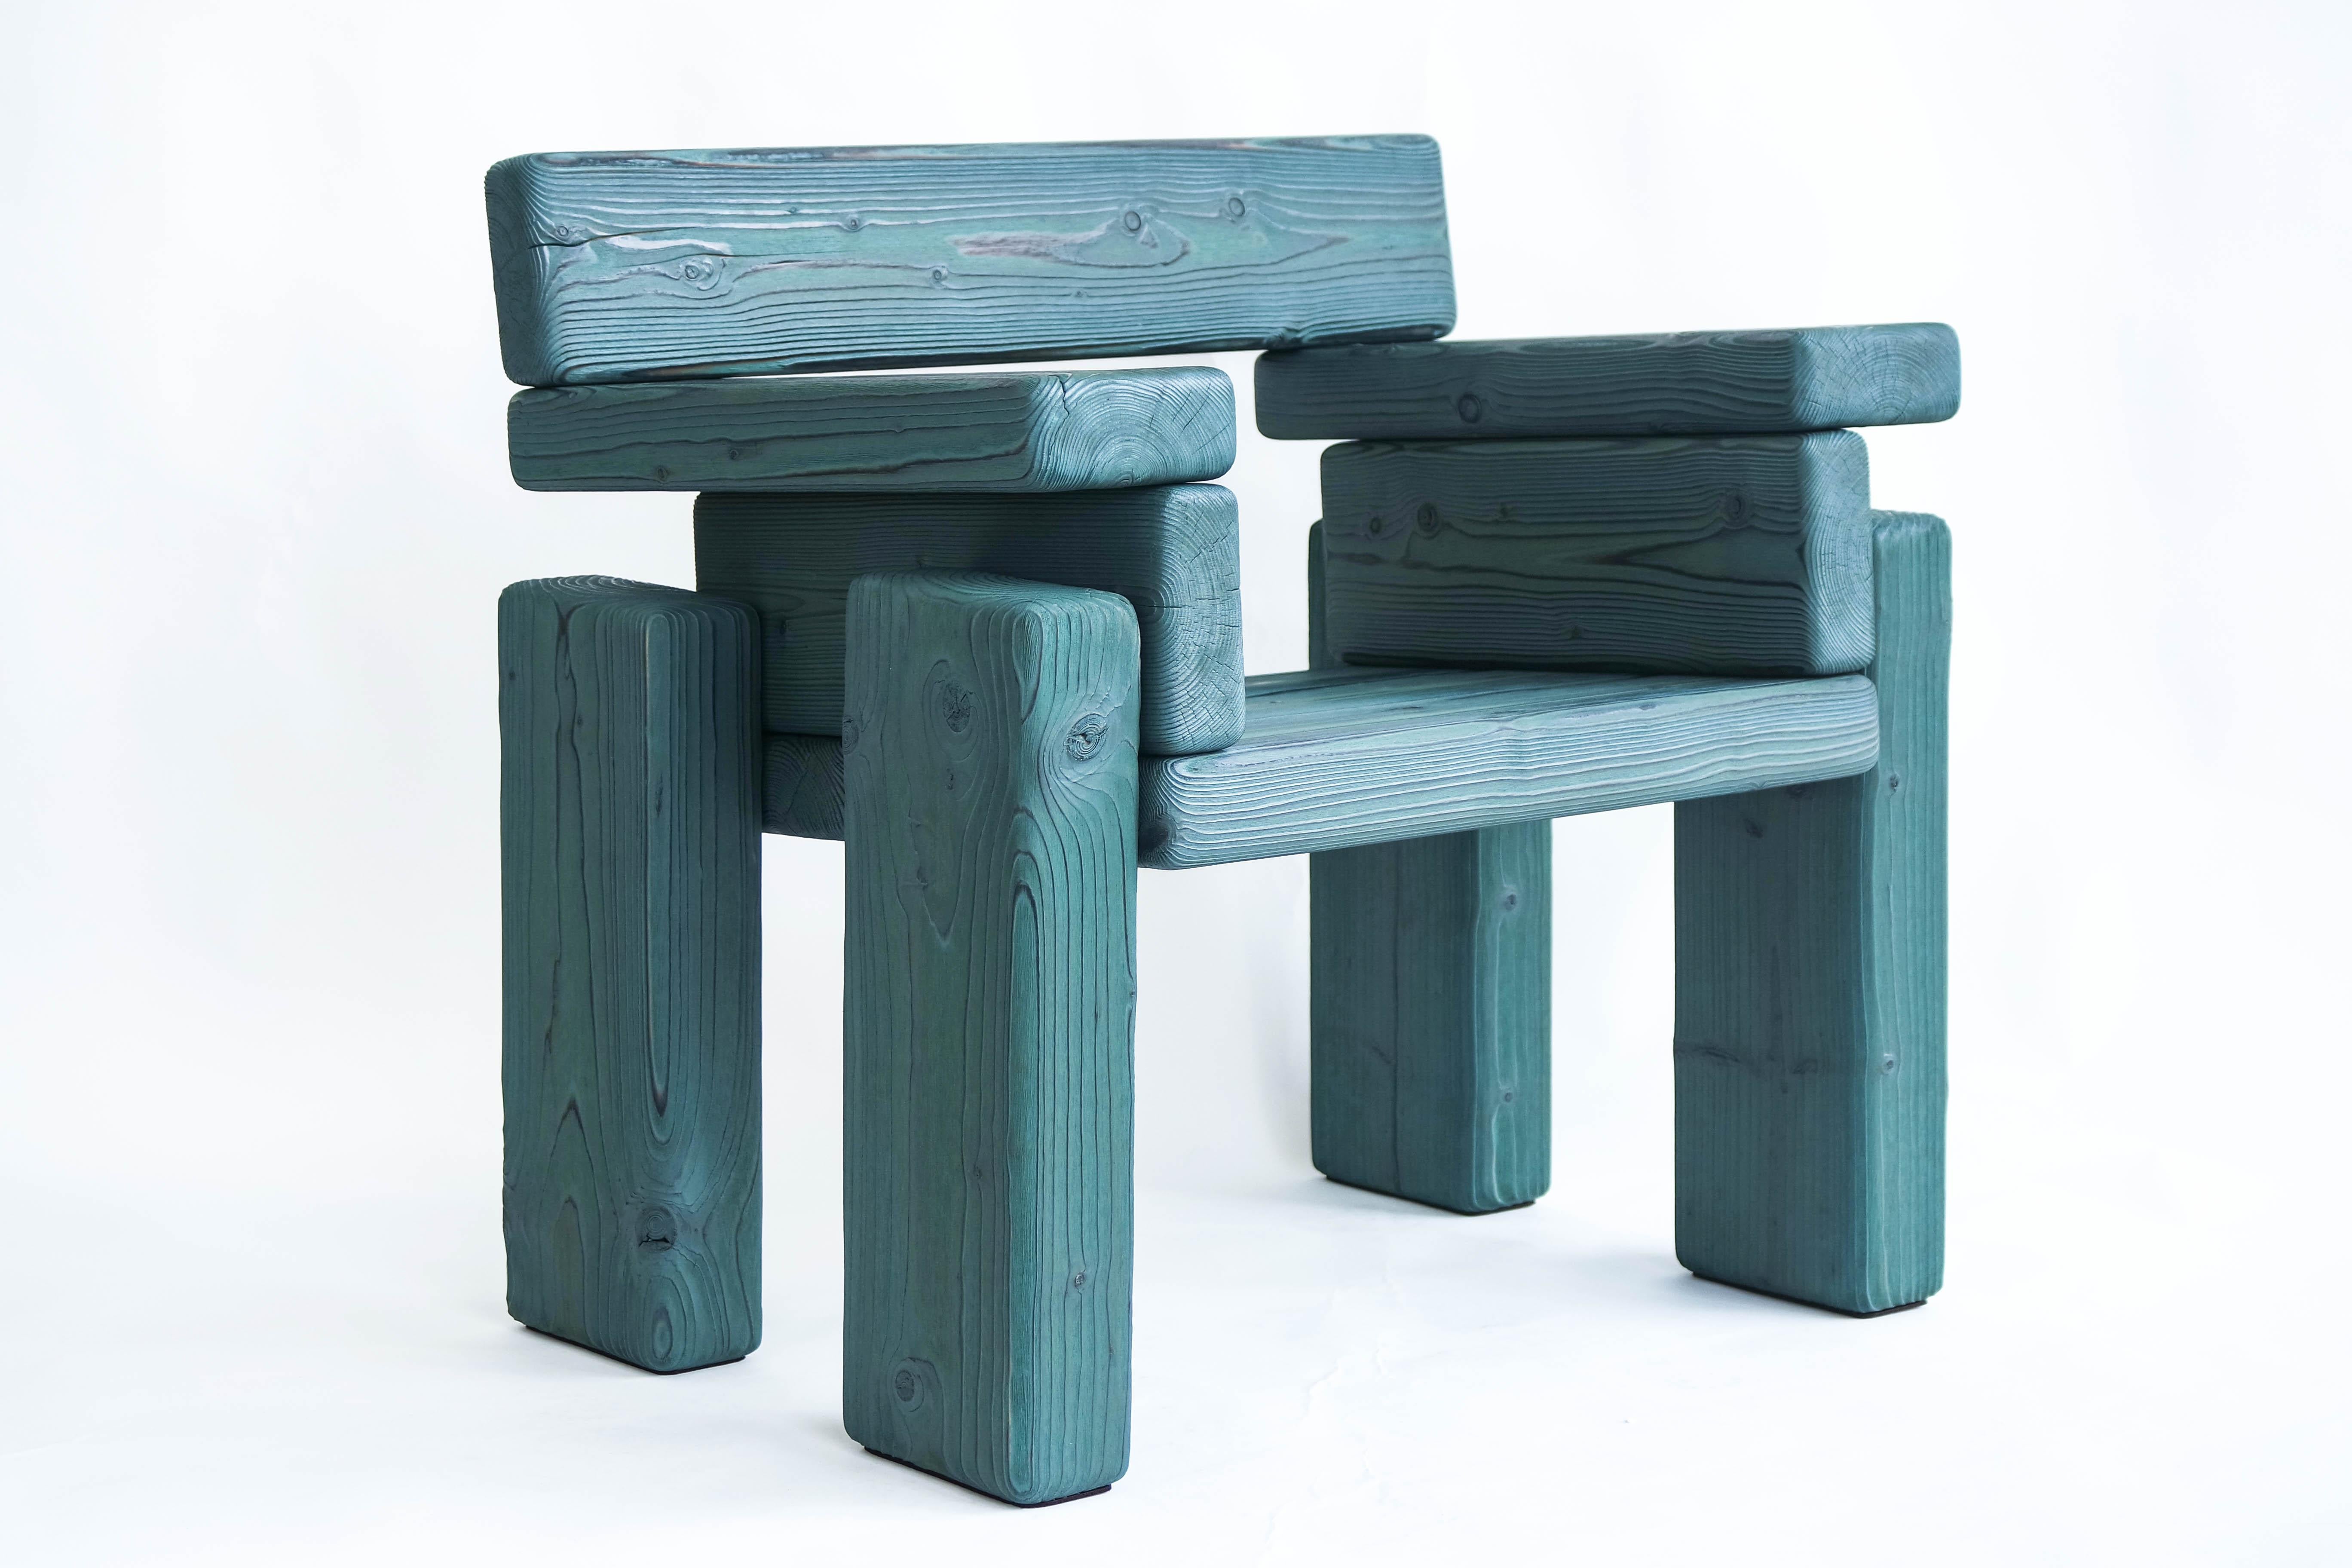 Timber Armchair by Onno Adriaanse
Signed and numbered.
Dimensions: W 58 x D 82 x H 78 cm
Materials: Burned pine, colored linseed oil
Also available in color: indigo blue, purple-red, uncolored wood. More colors on request.

By stacking solid wood